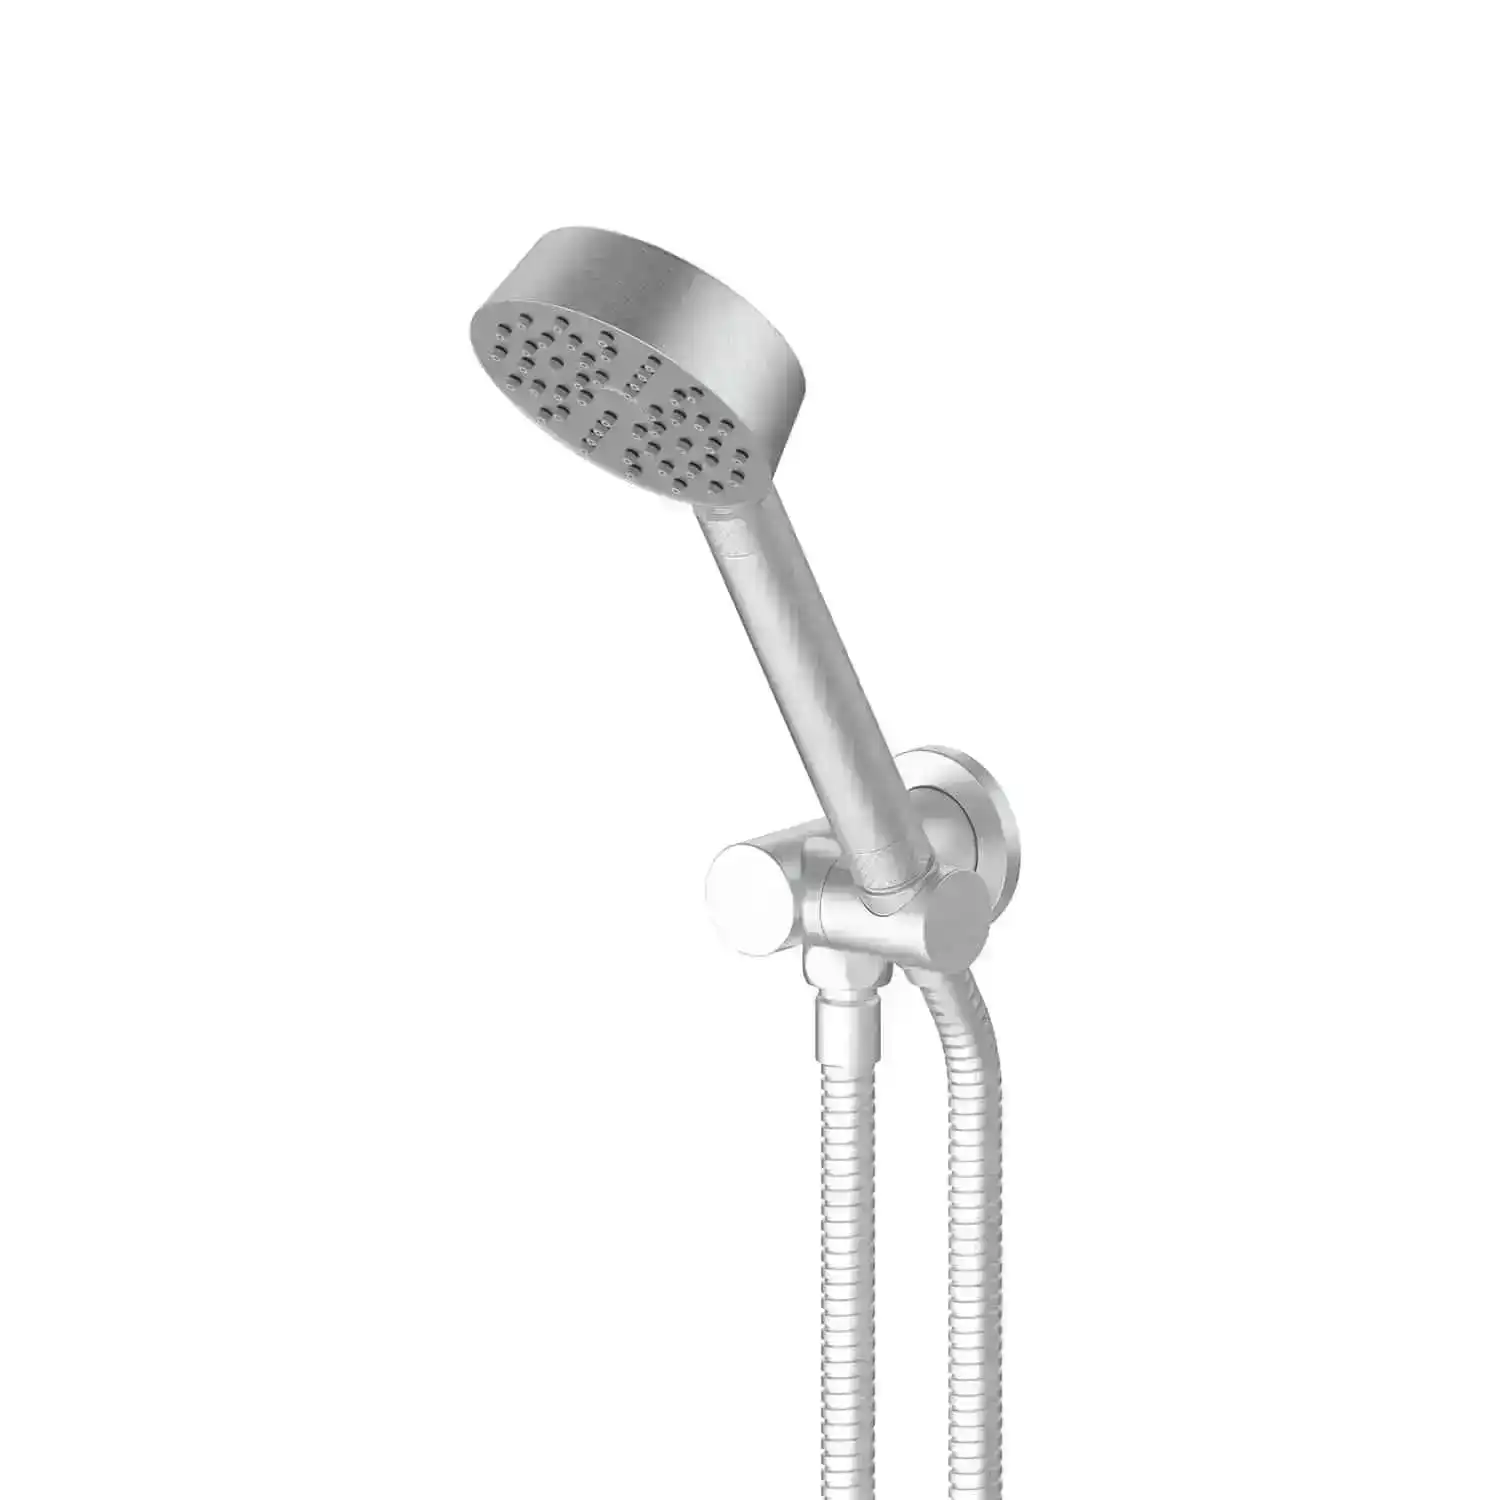 Greens Gisele Hand Shower Brushed Stainless 904690003